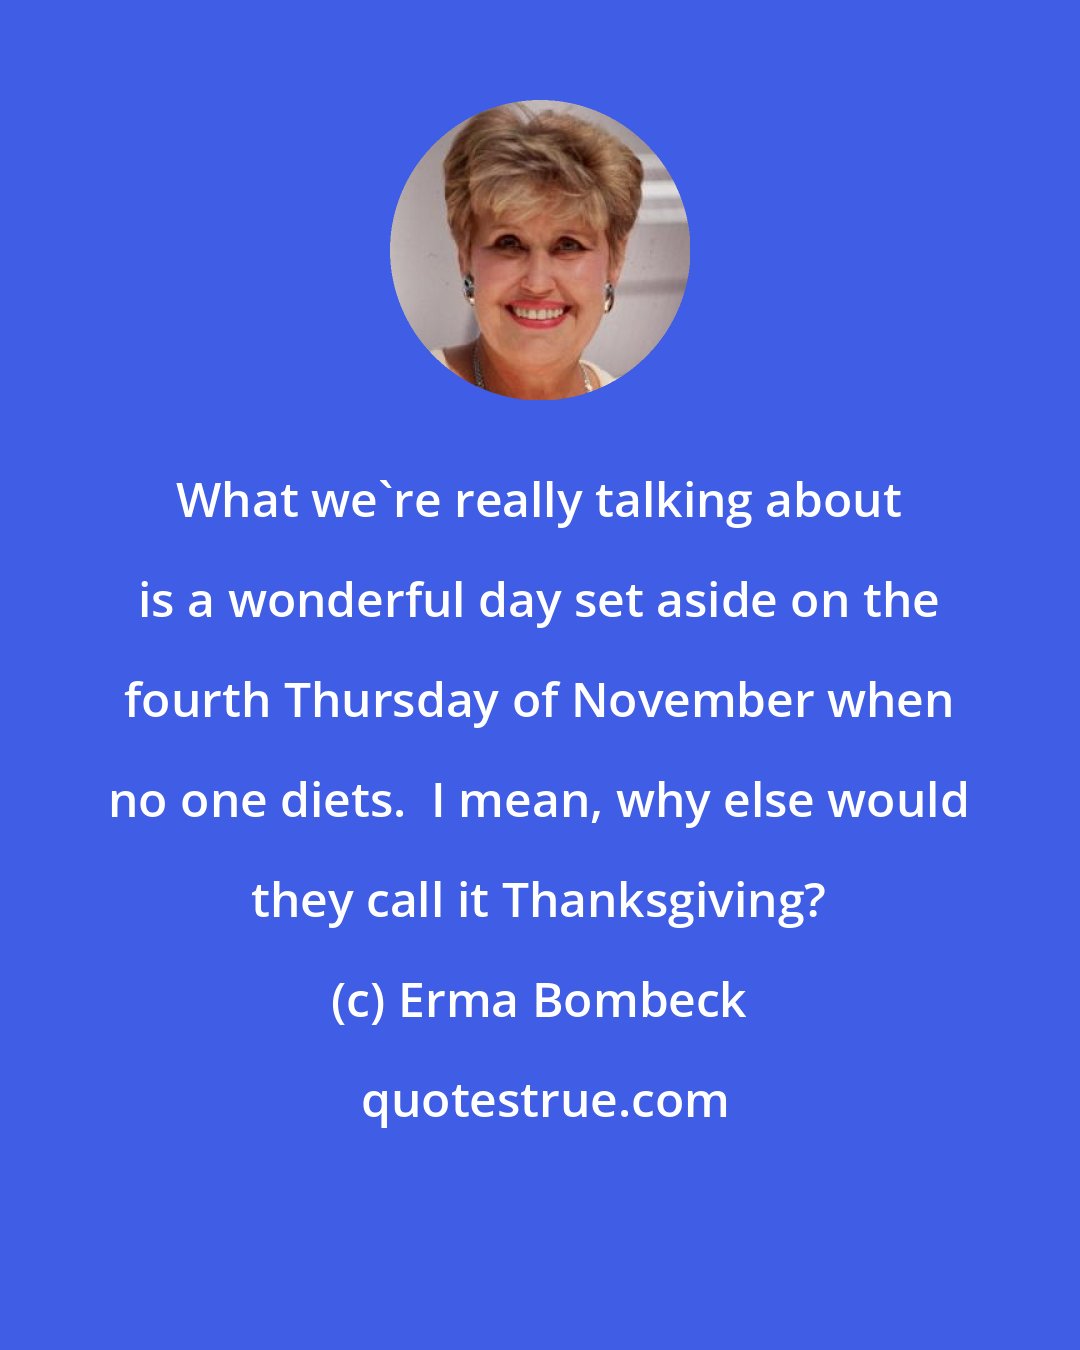 Erma Bombeck: What we're really talking about is a wonderful day set aside on the fourth Thursday of November when no one diets.  I mean, why else would they call it Thanksgiving?